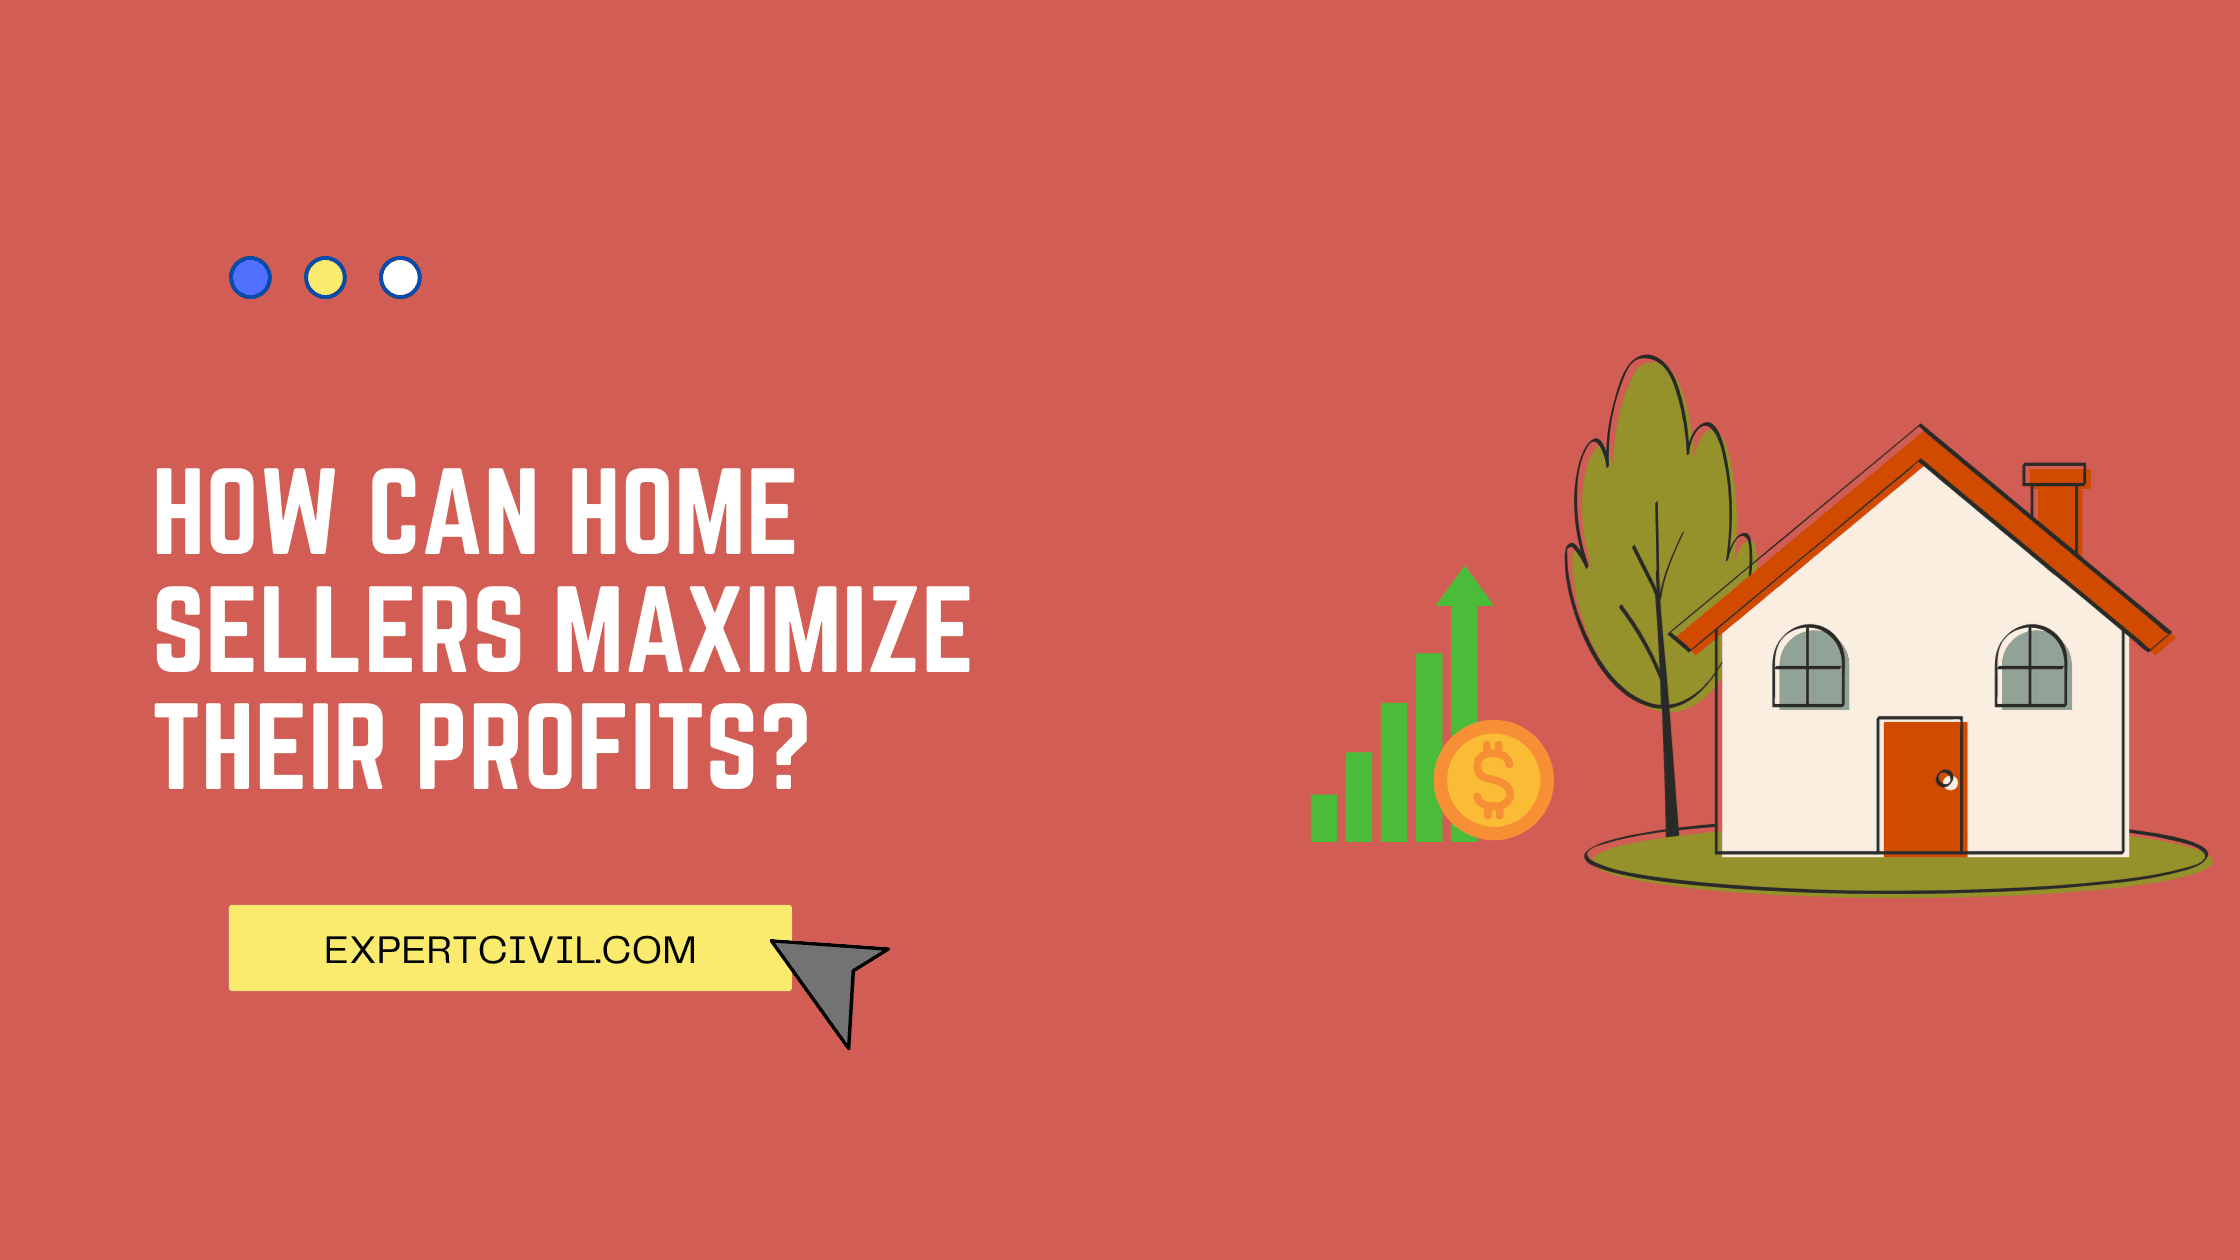 How Can Home Sellers Maximize Their Profits?